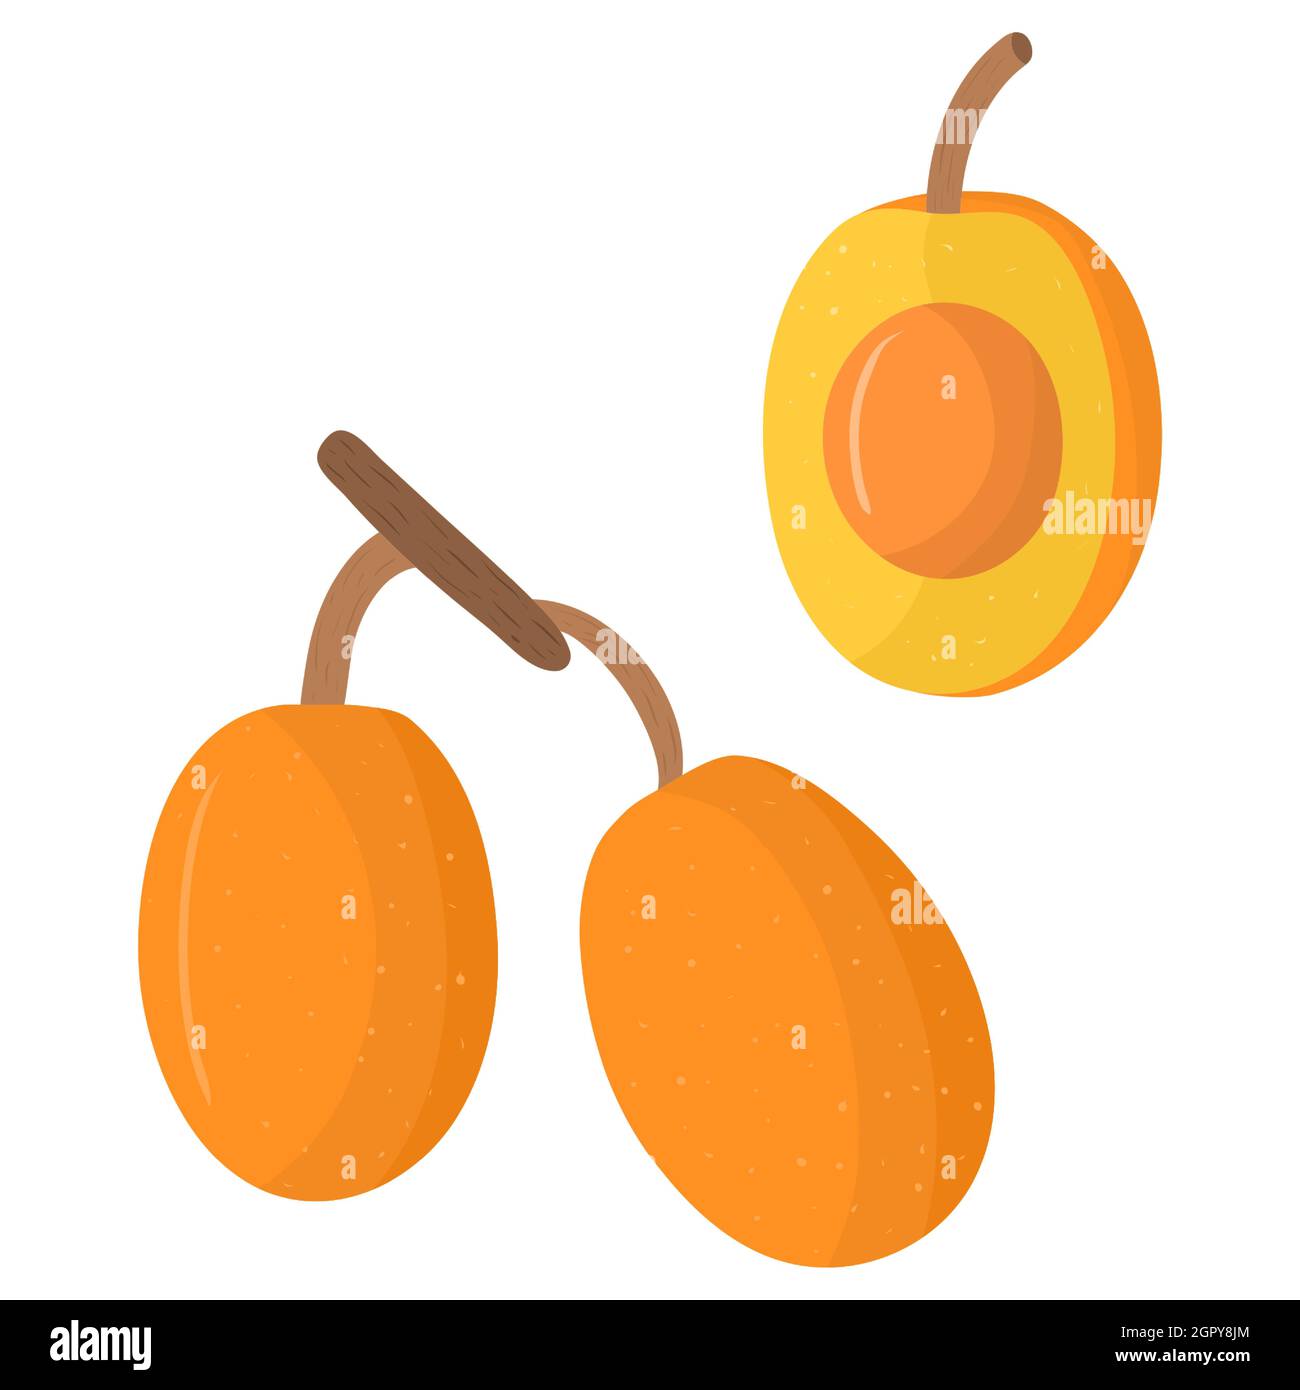 Cartoon illustration with colorful ximenia fruit. Farm market product. Vector hand drawn graphic. Single isolated art. Stock Vector